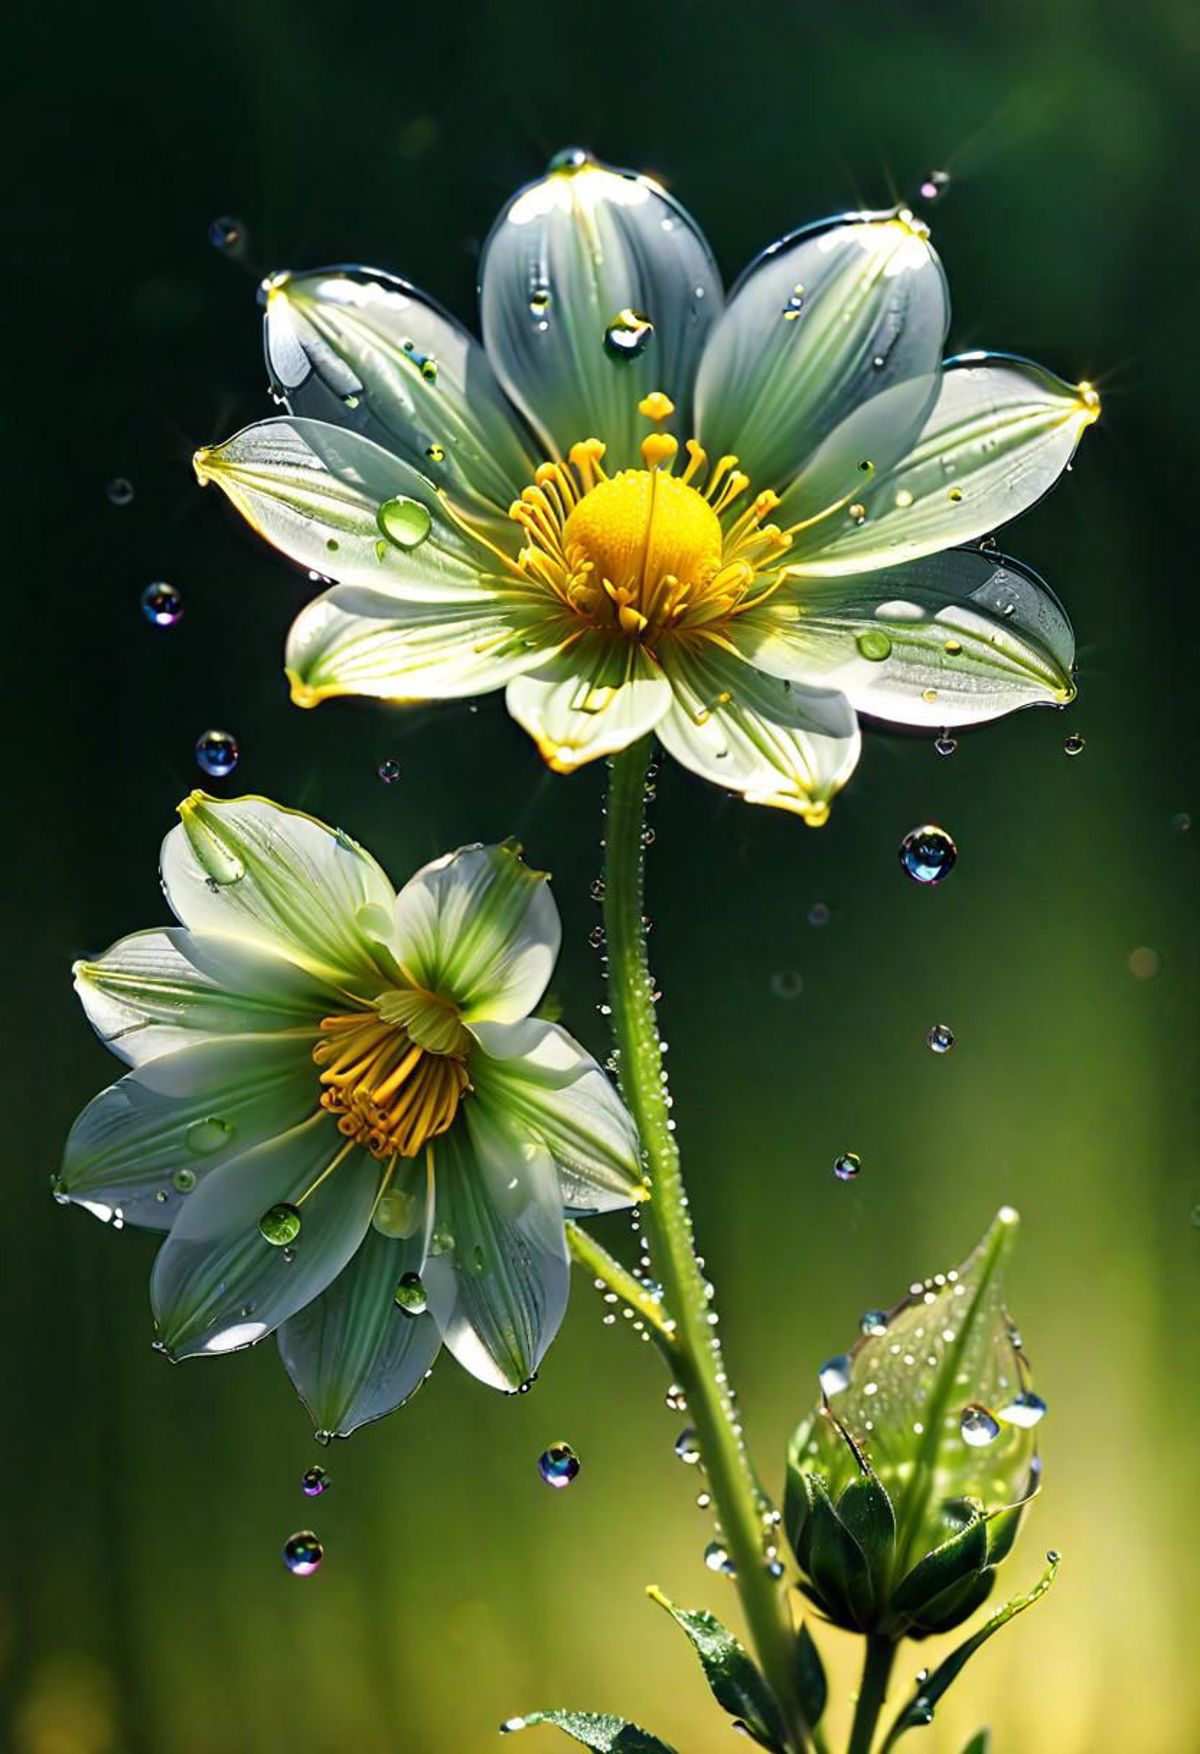 A close-up of a flower with water droplets on it.